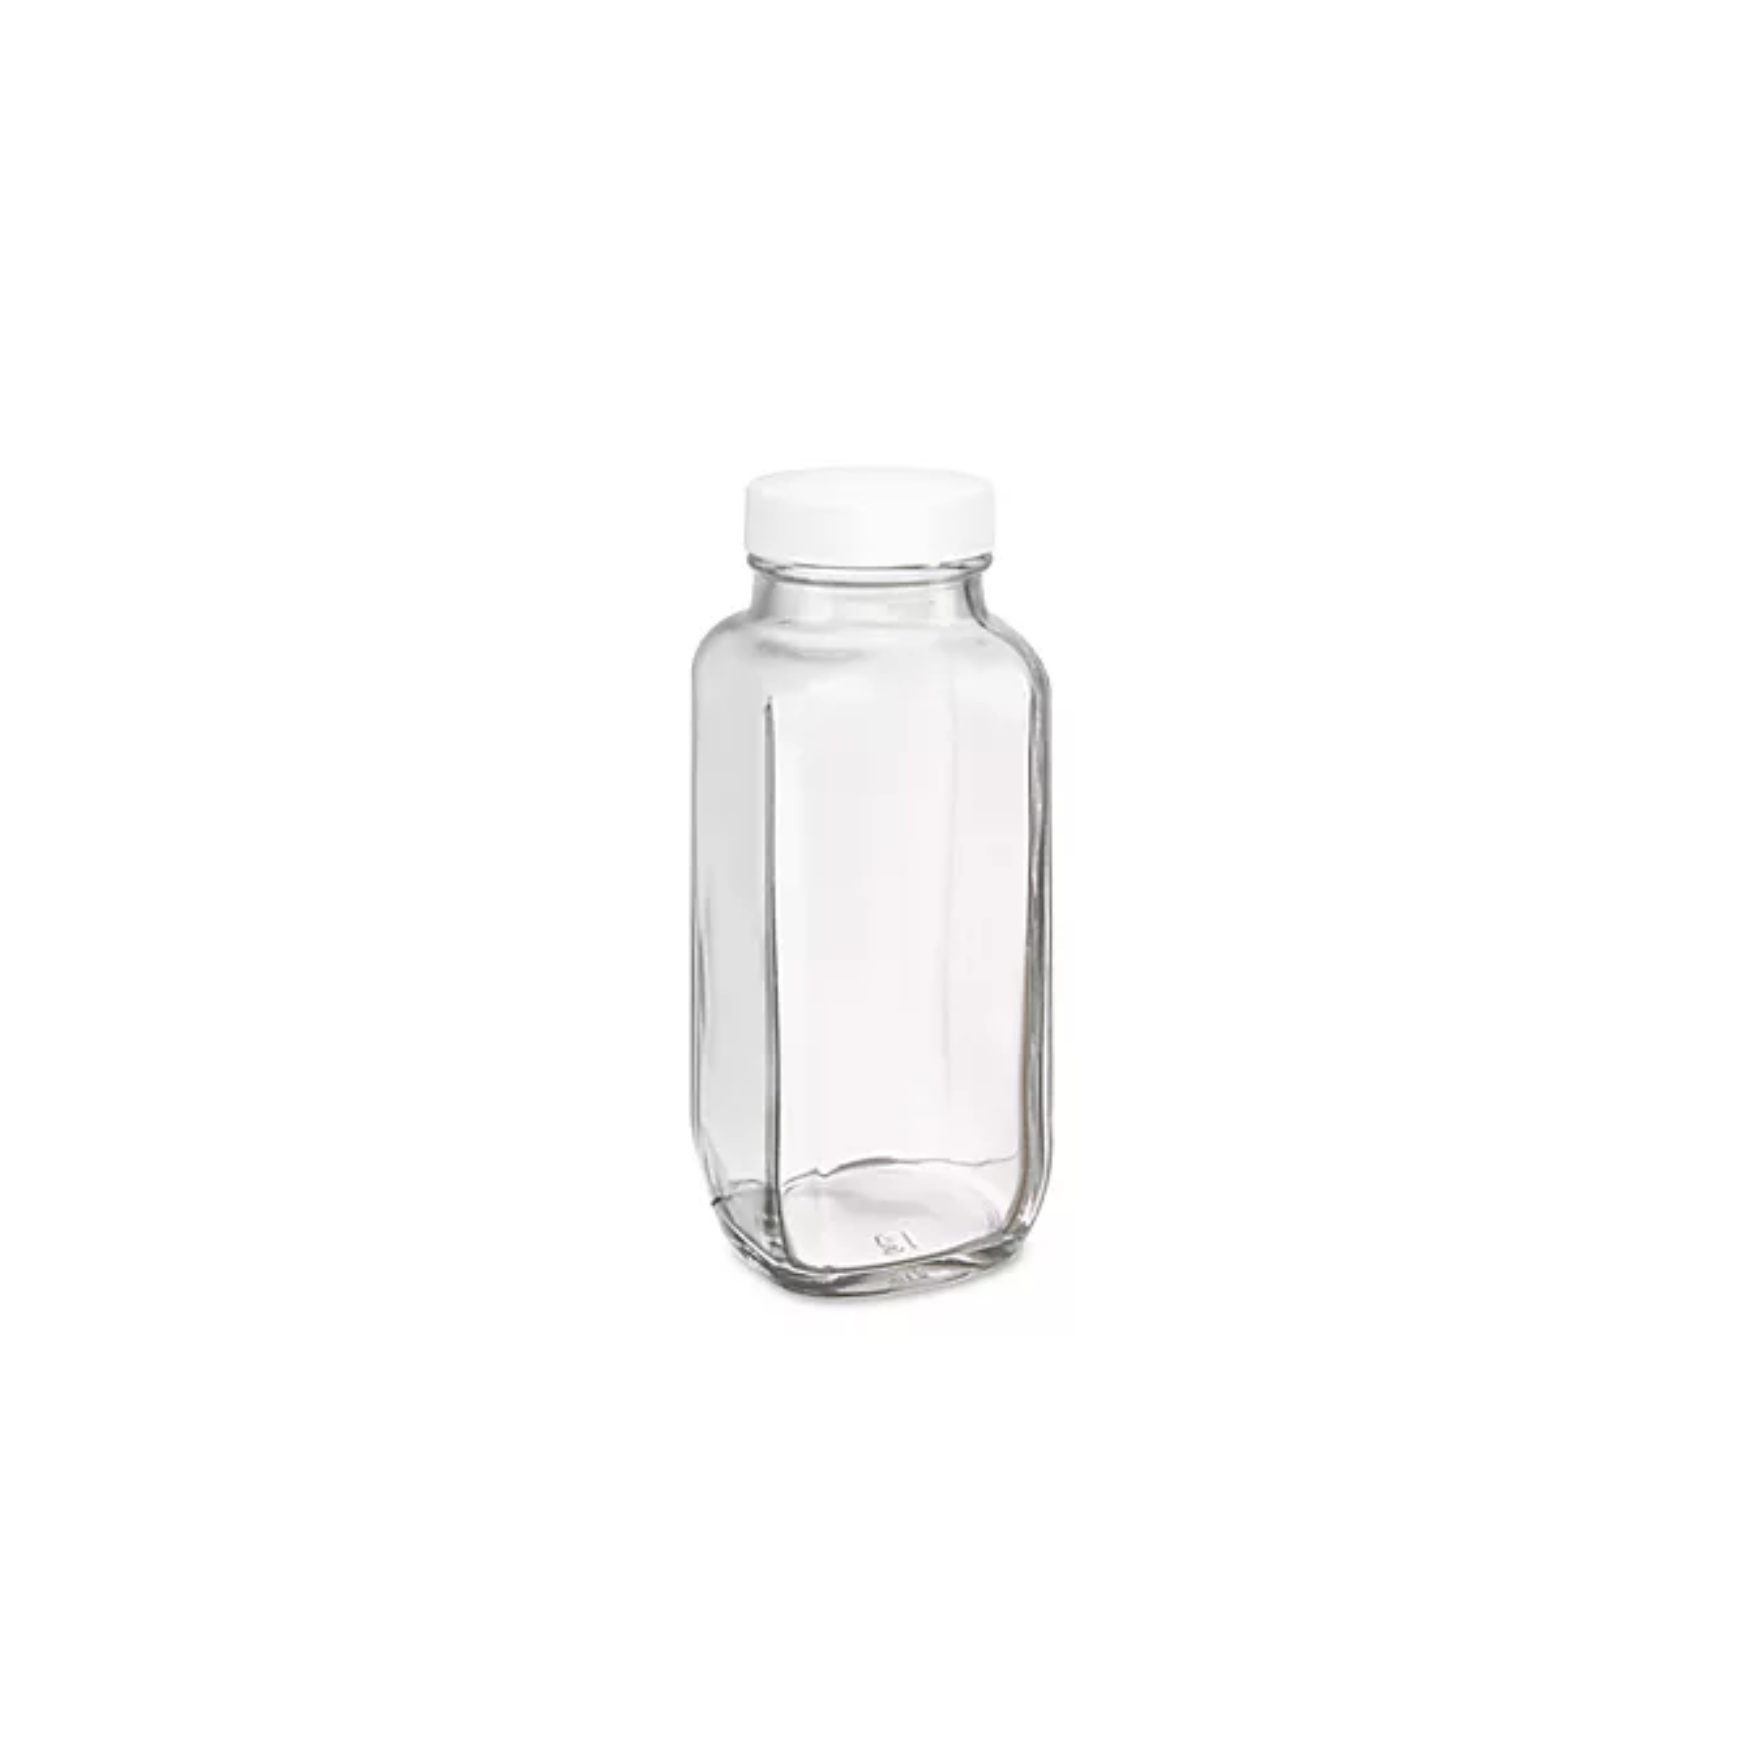 French Square Glass Jars With Lid 8 Oz